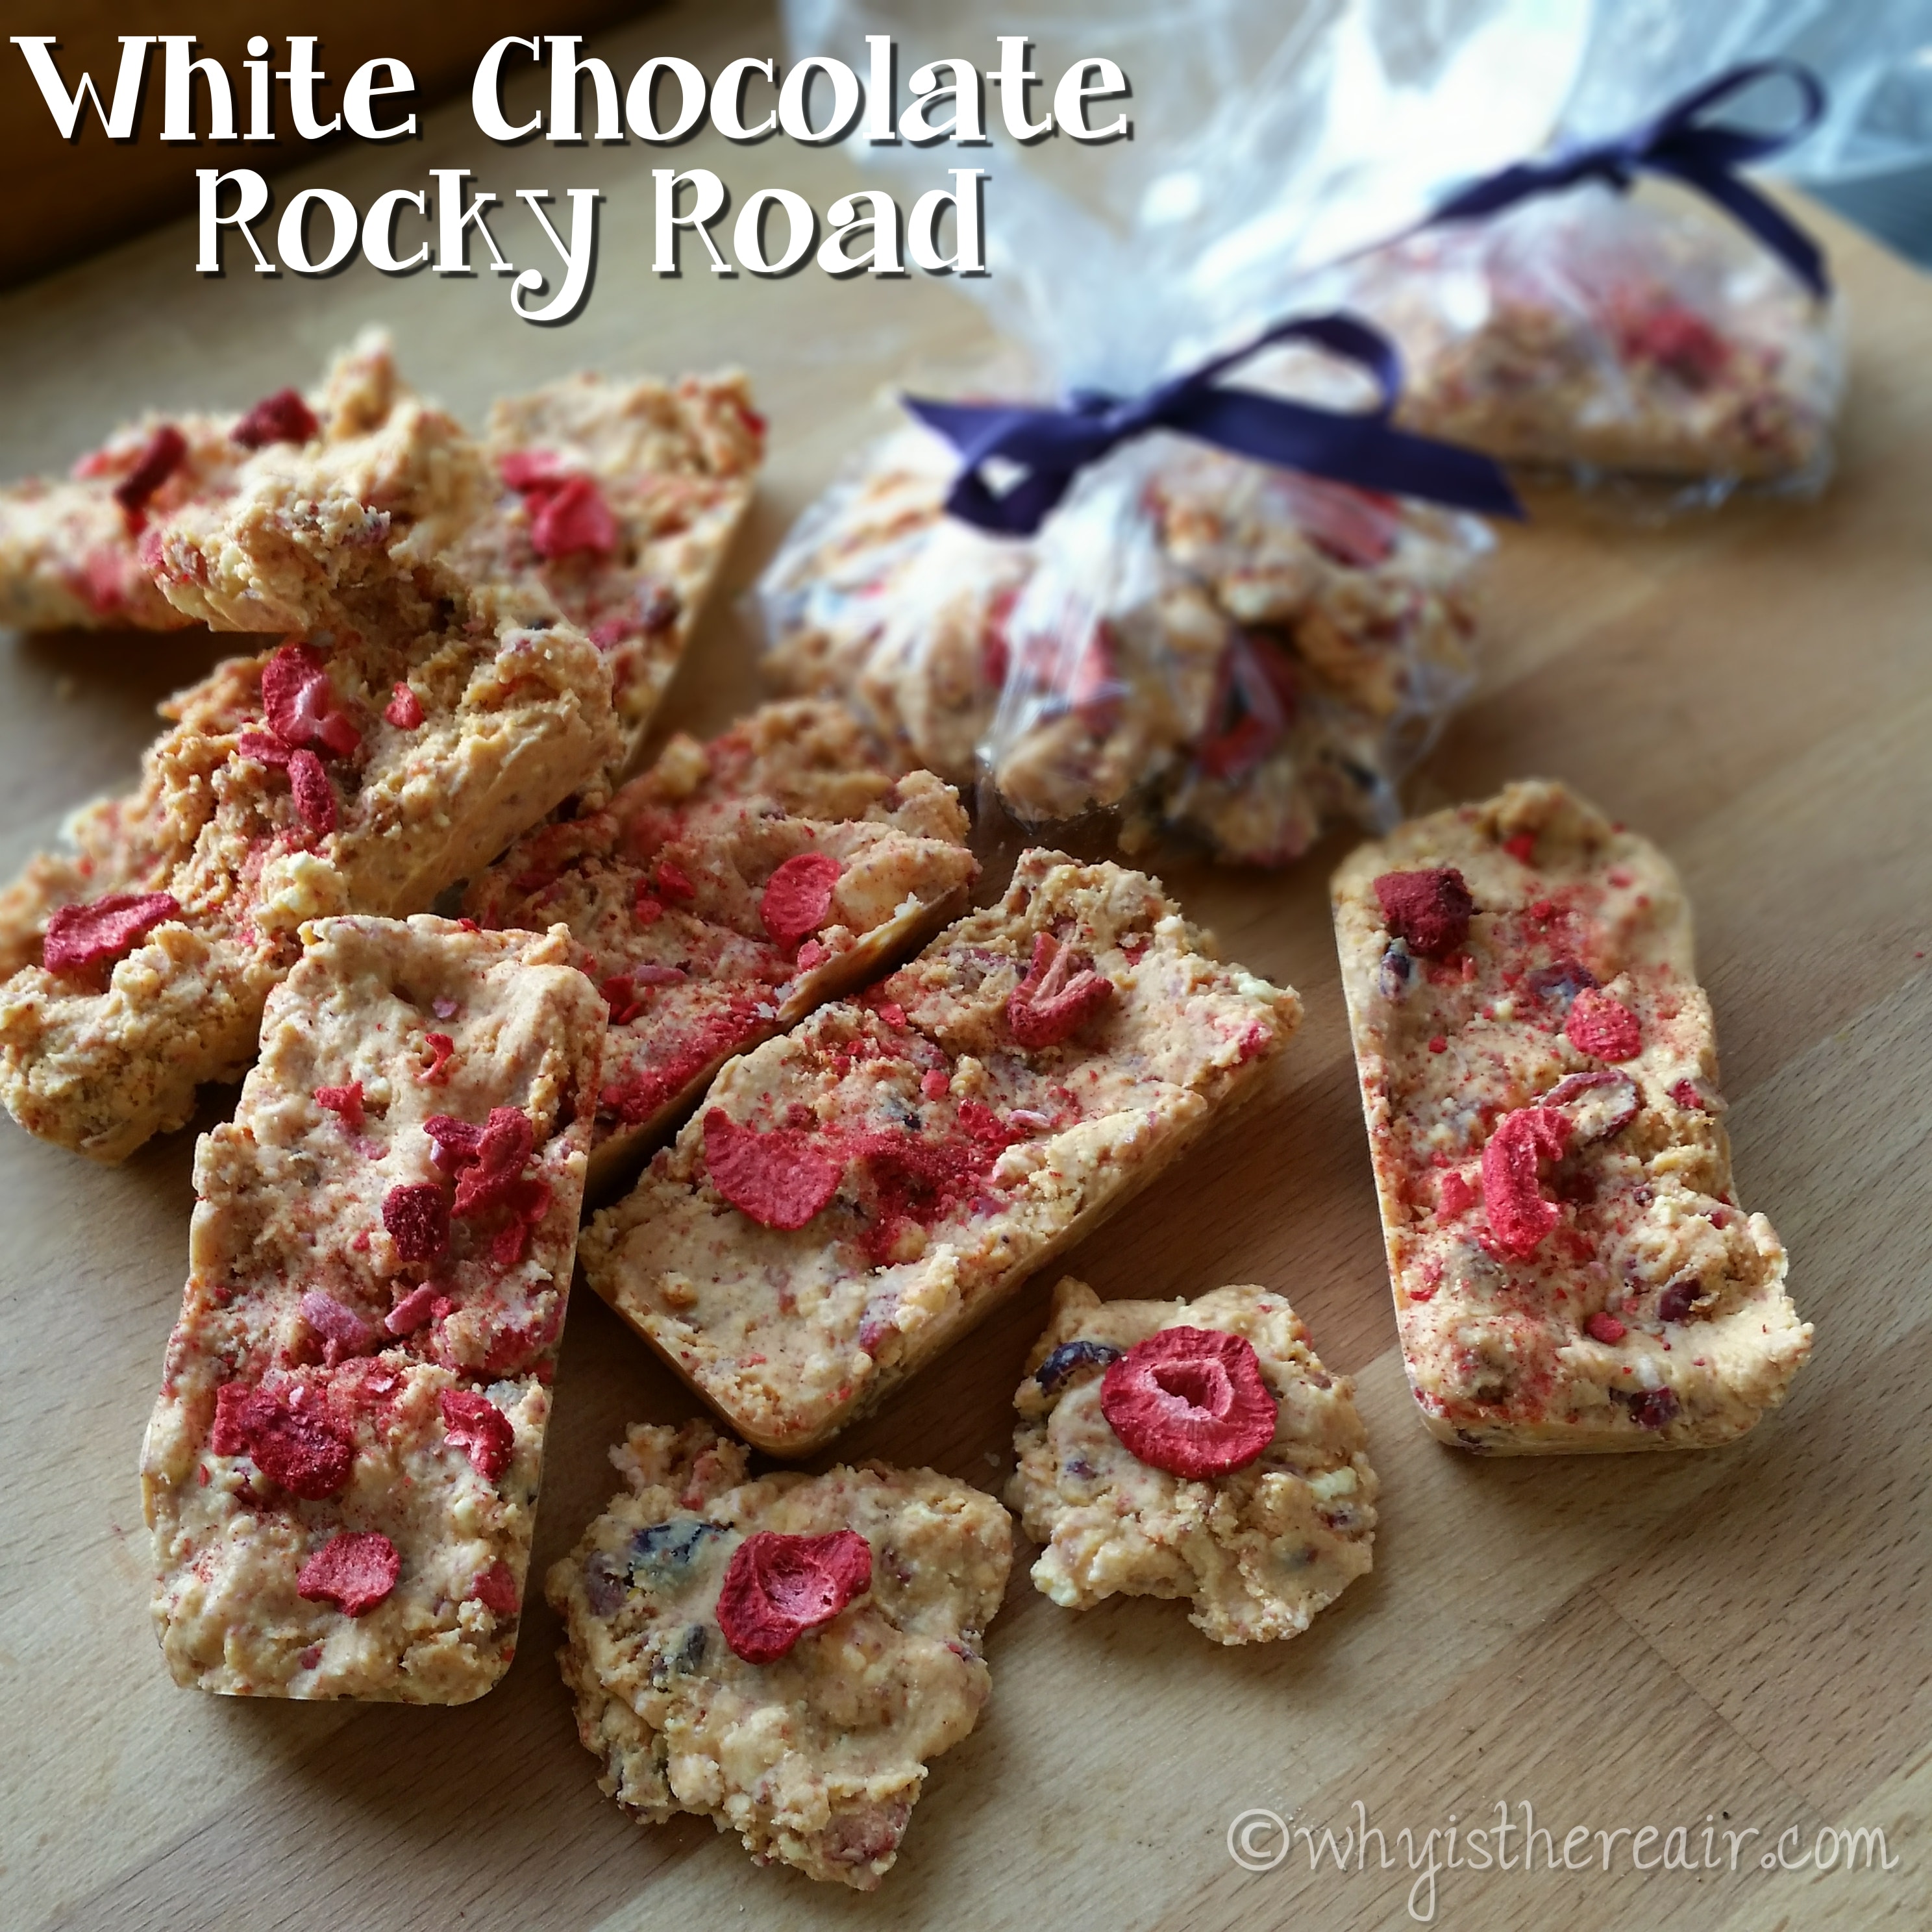 Thermomix Christmas Gift Ideas including Sally’s White Chocolate & Strawberry Rocky Road